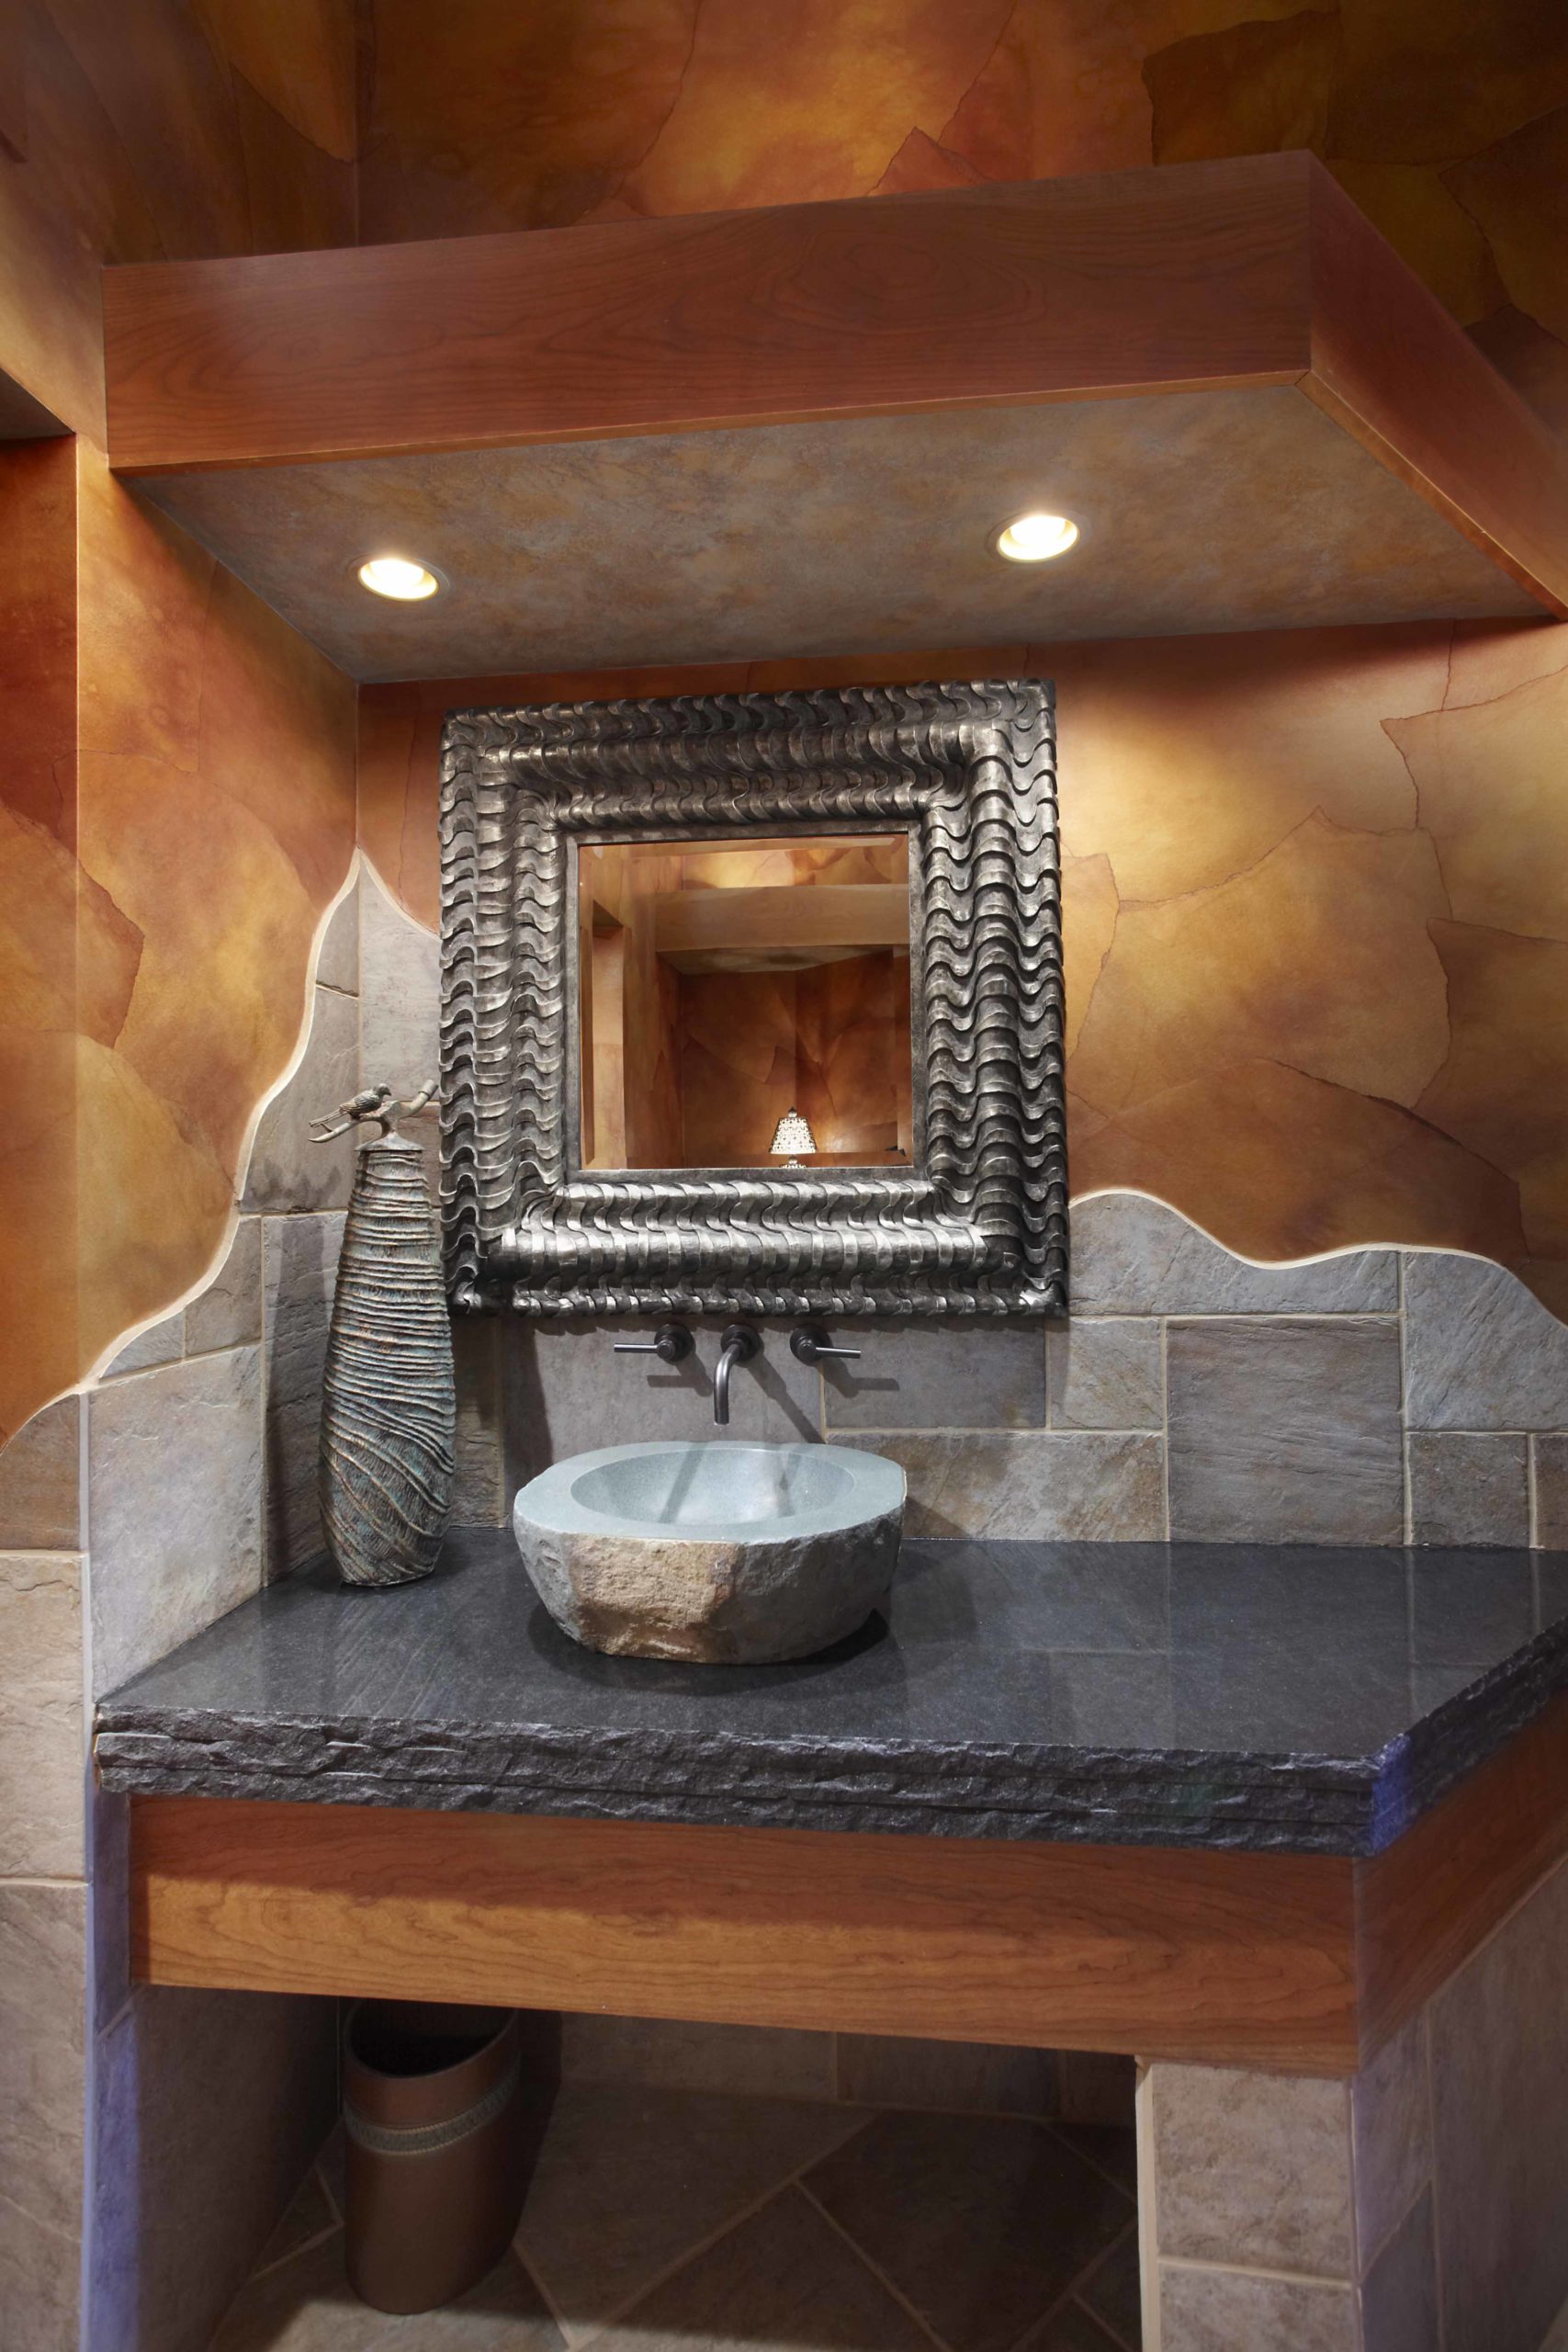 Bathroom with brown and grey stone on the walls and a square mirror hanging over the vanity